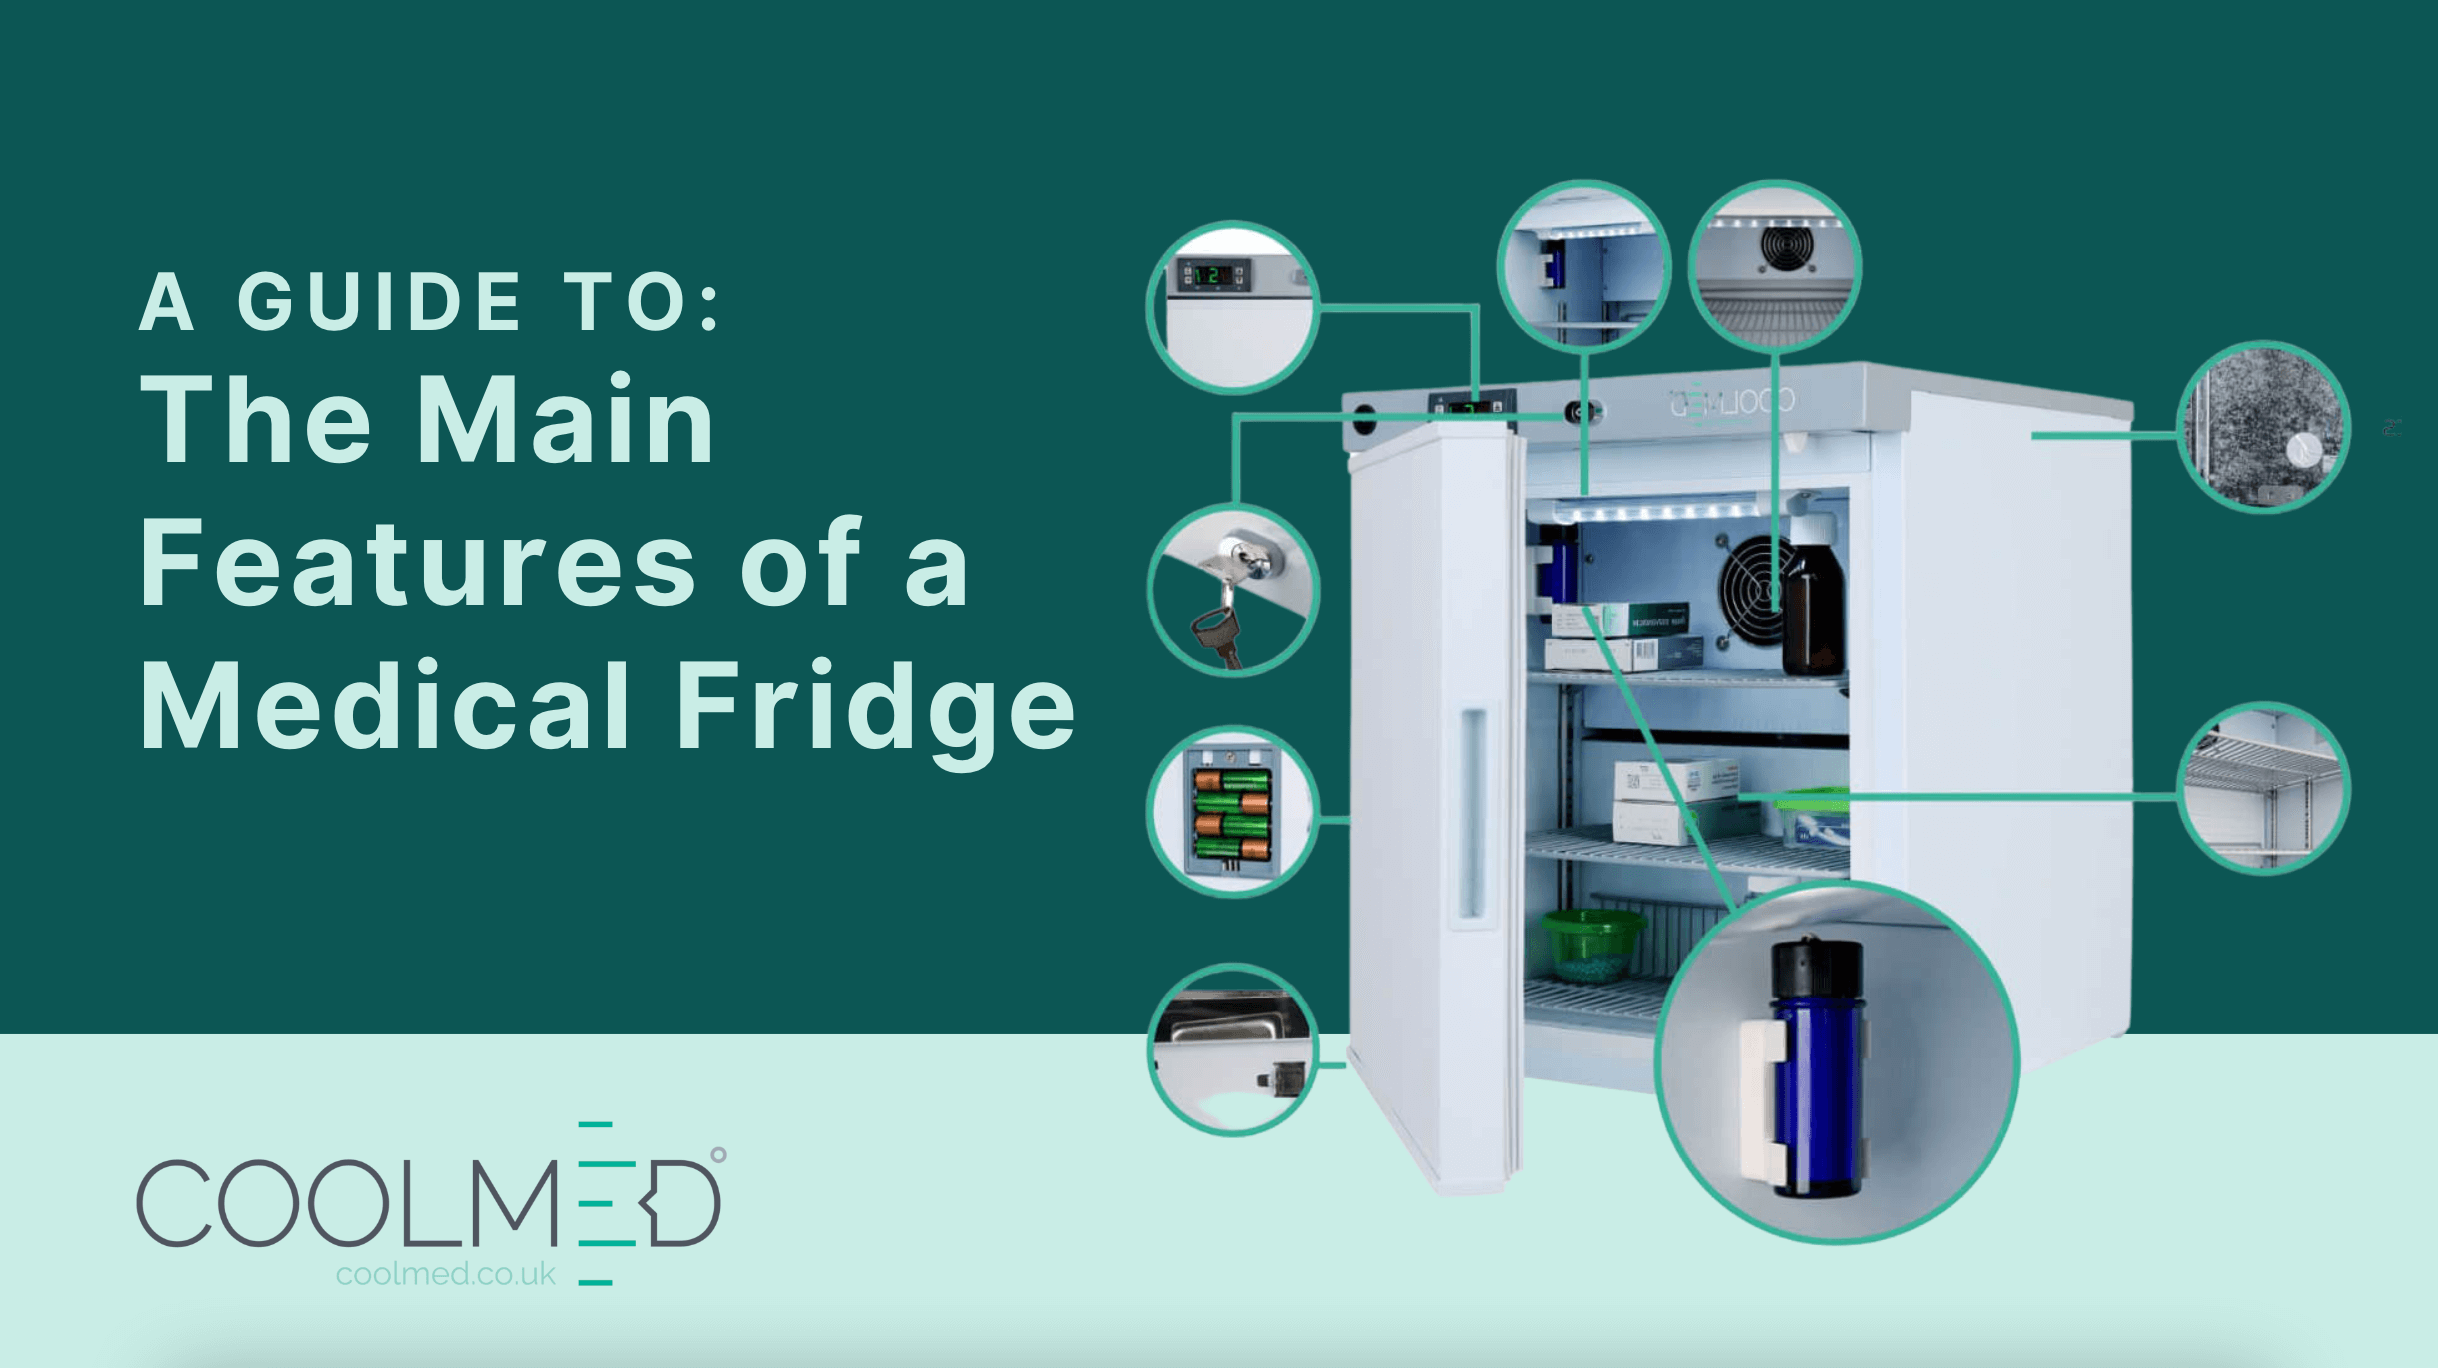 Features of a medical fridge graphic by CoolMed